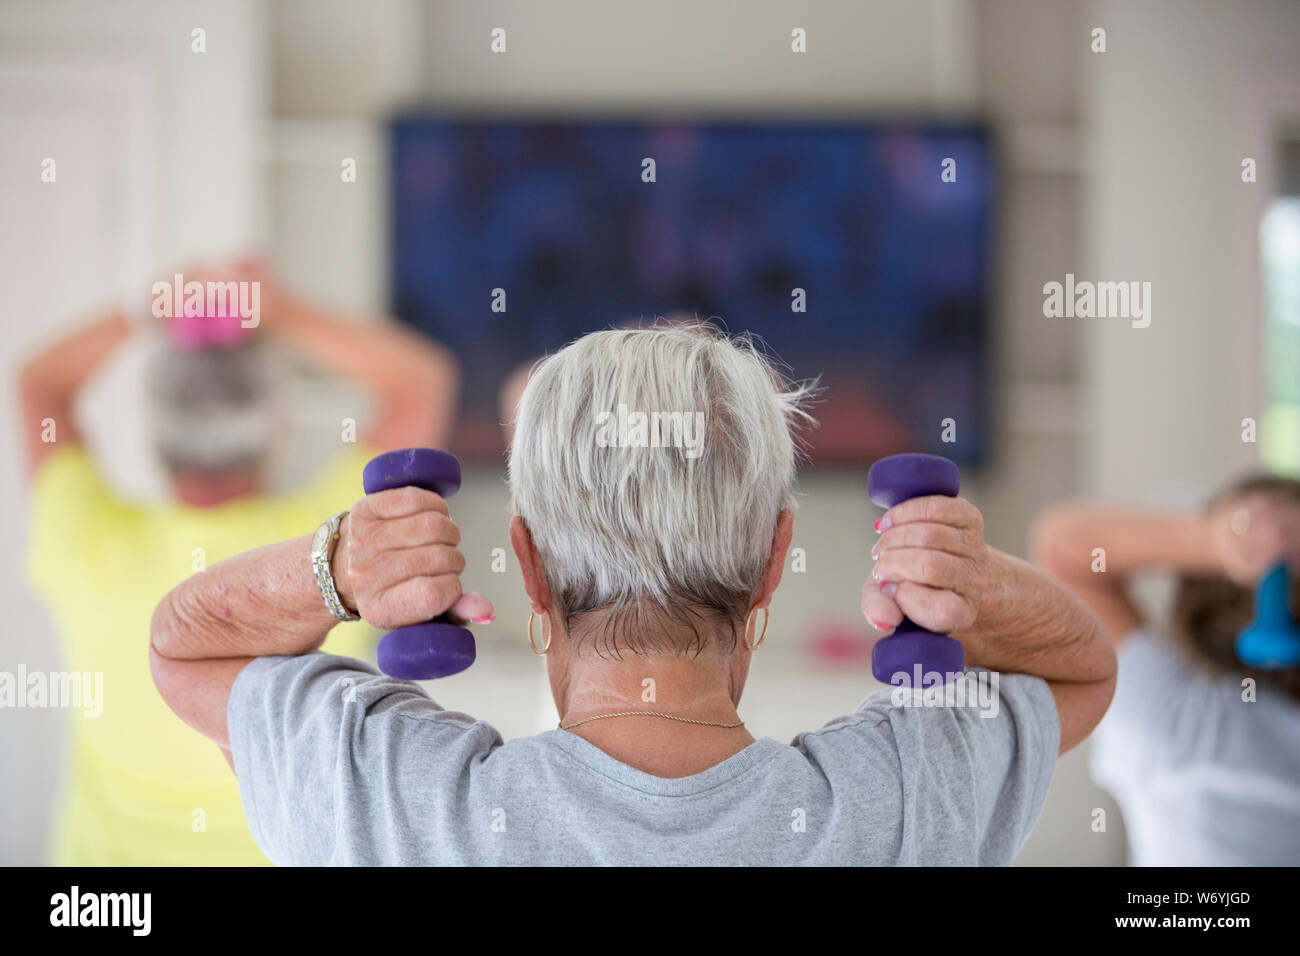 Rear view of senior woman exercising in gym Stock Photo